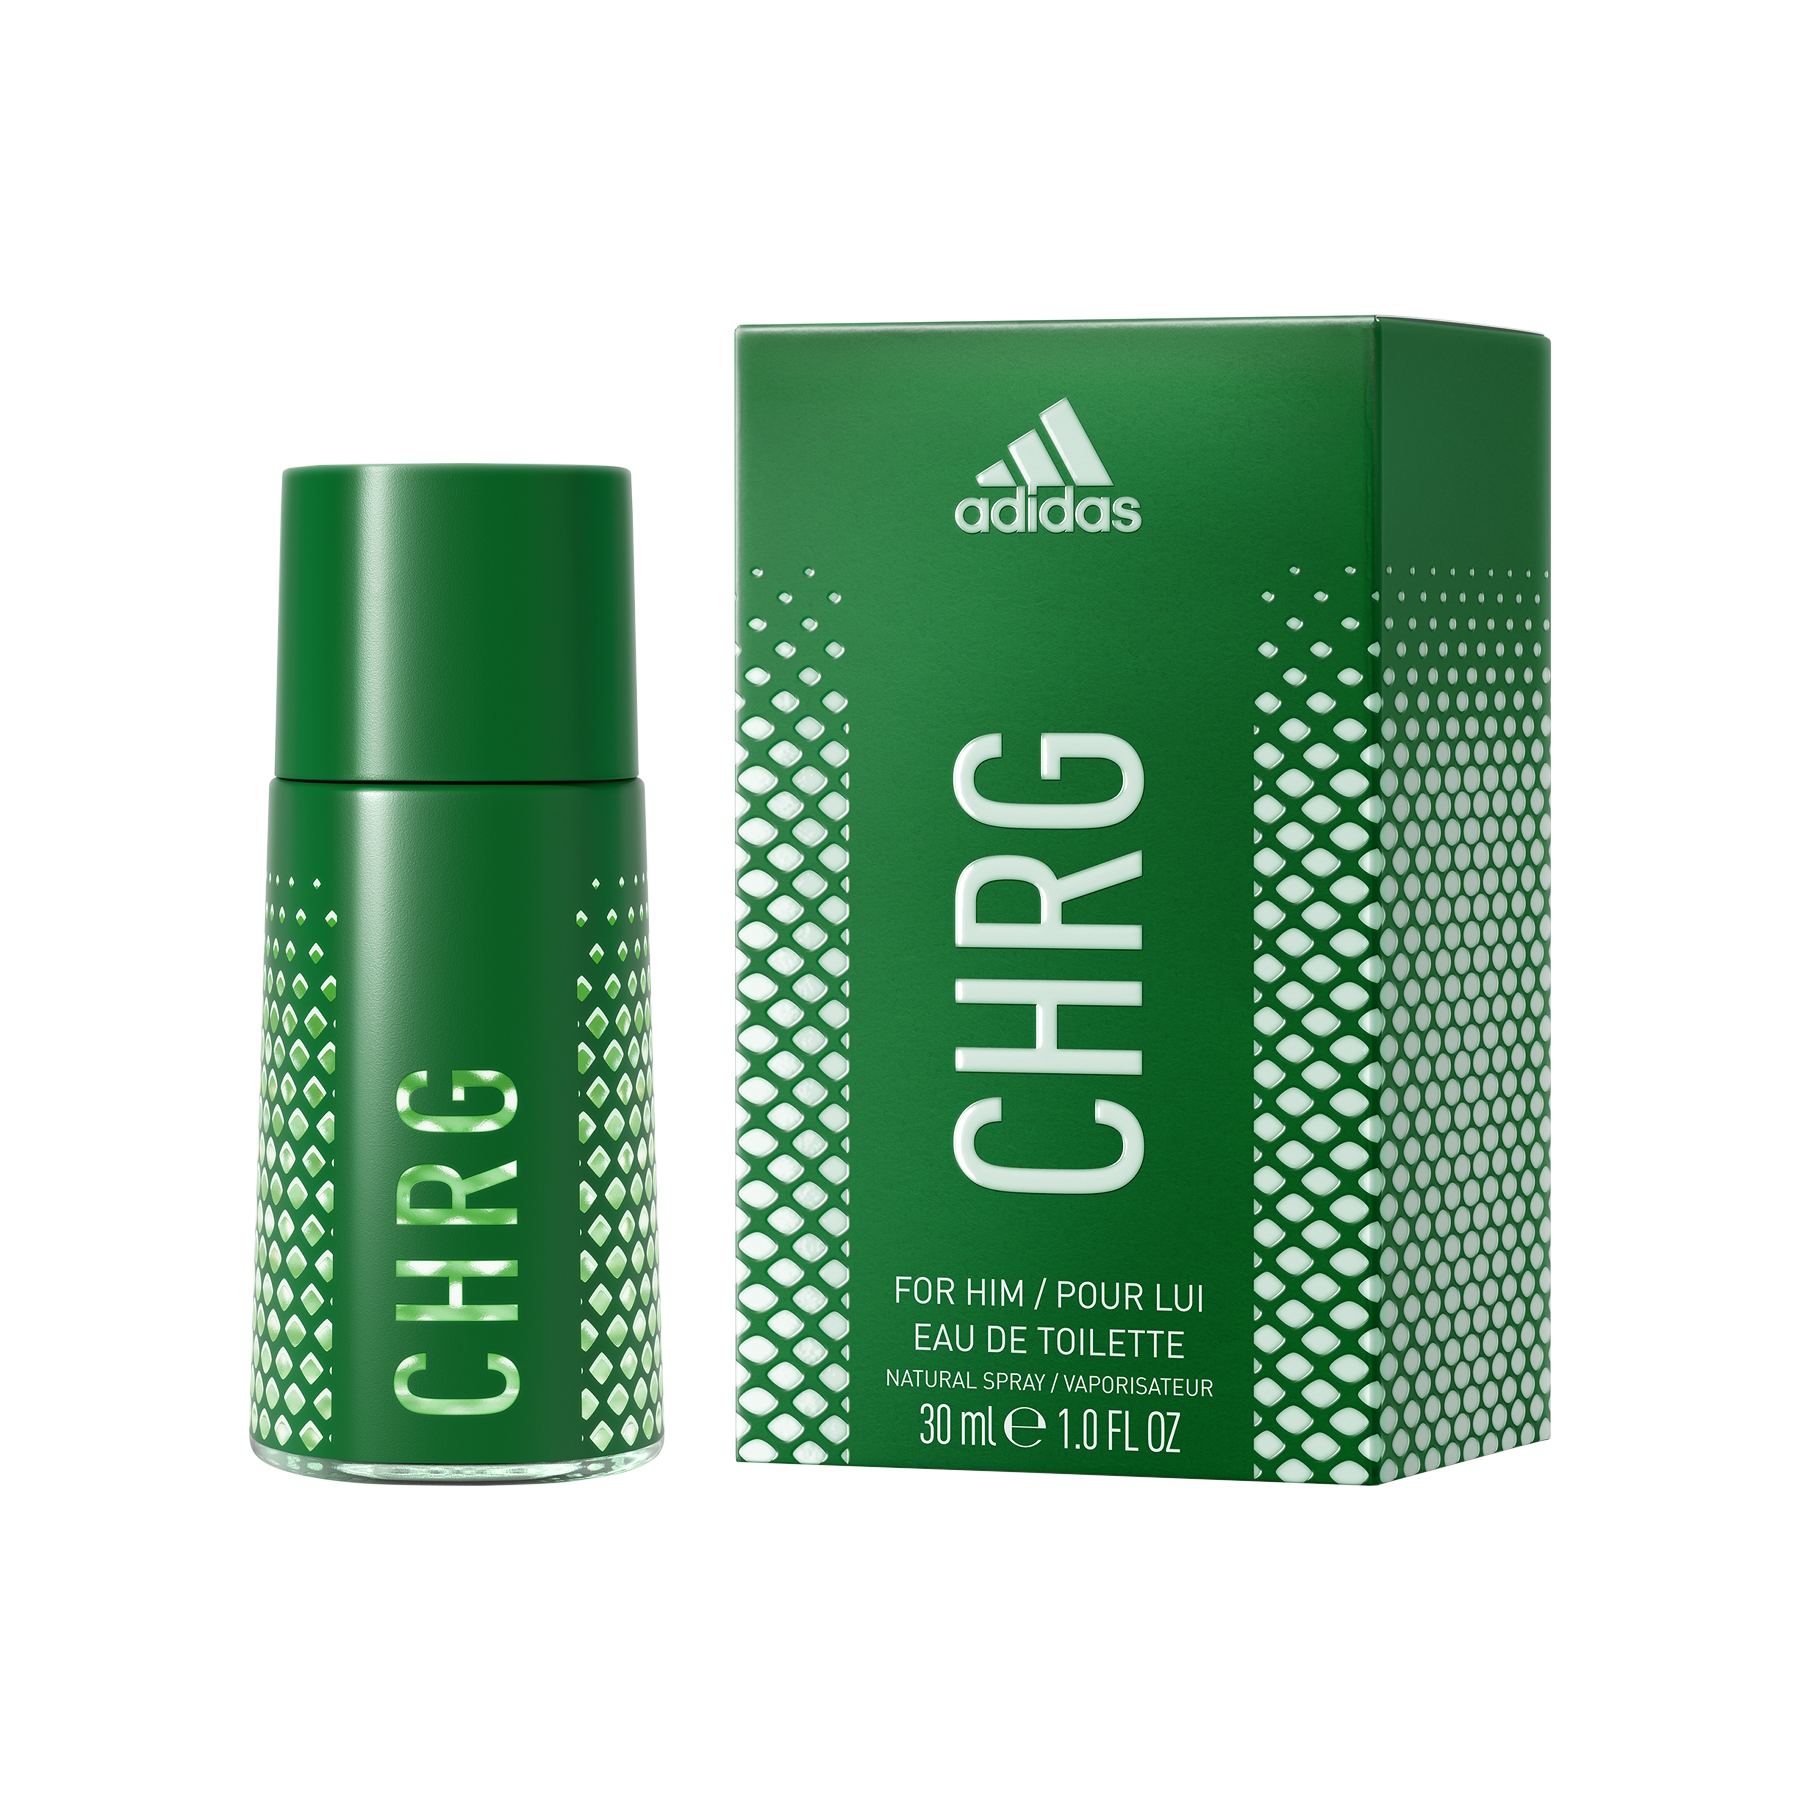 Culture of Sport Charge, 30 ml Adidas Miesten hajuvedet